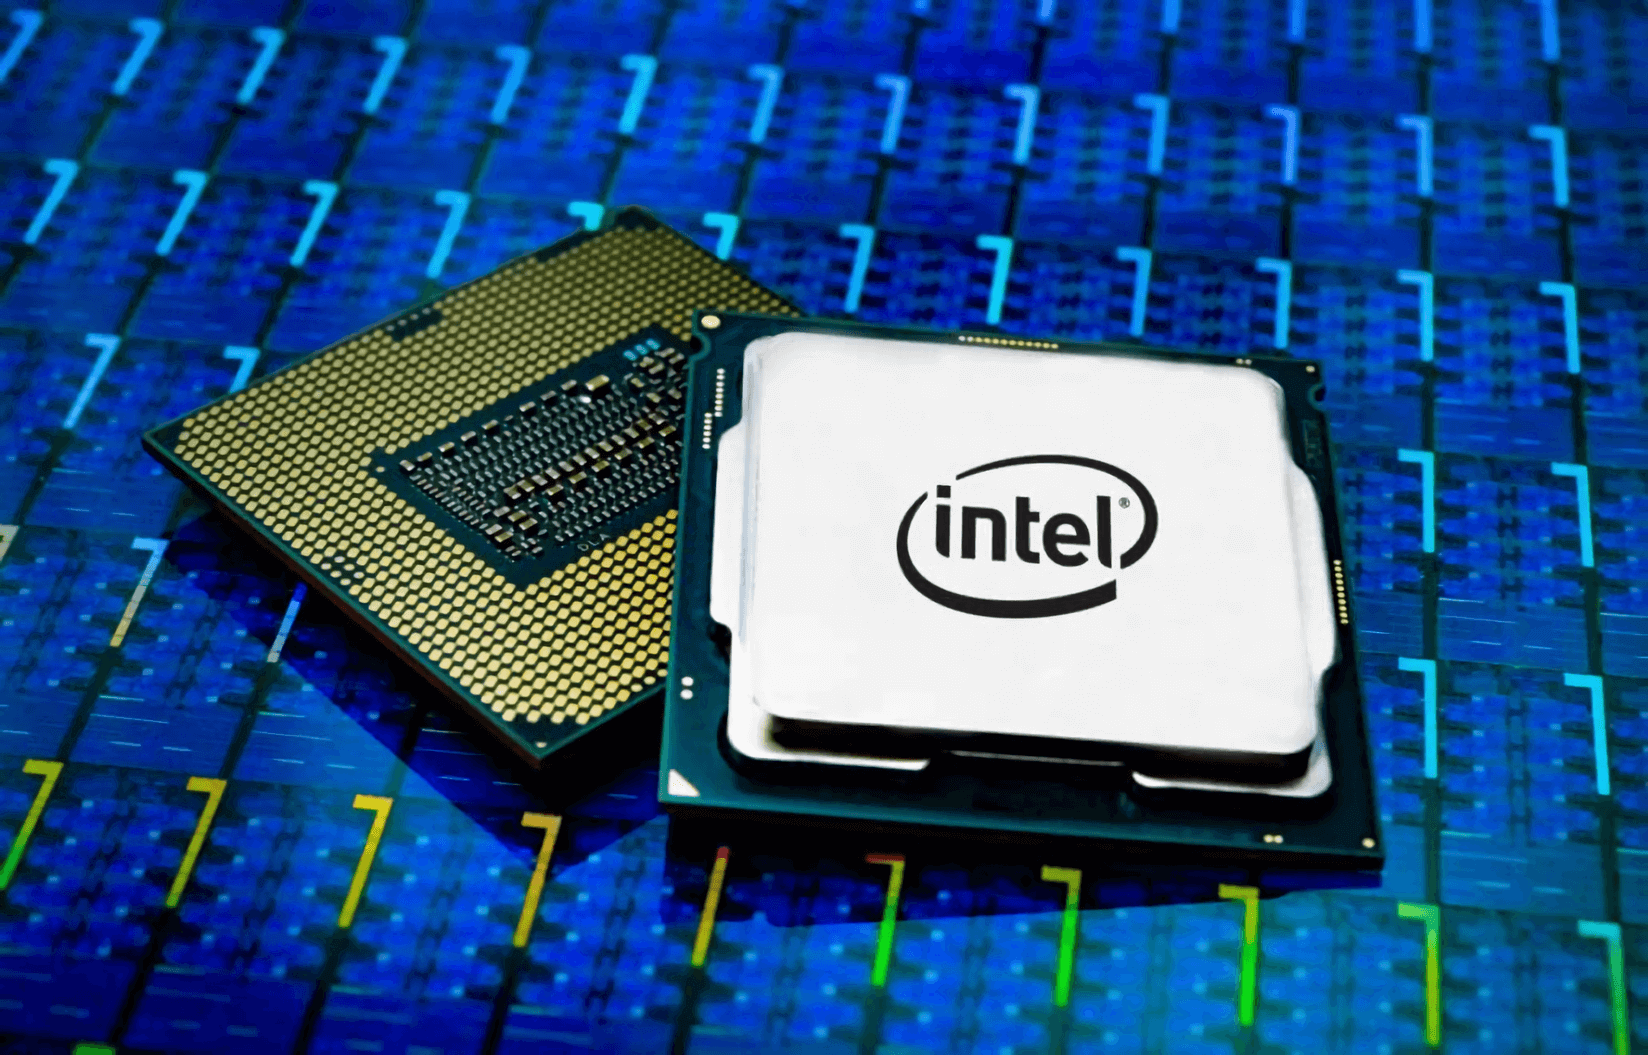 Microsoft quietly patched a Spectre-style vulnerability in Intel chips that could expose user data